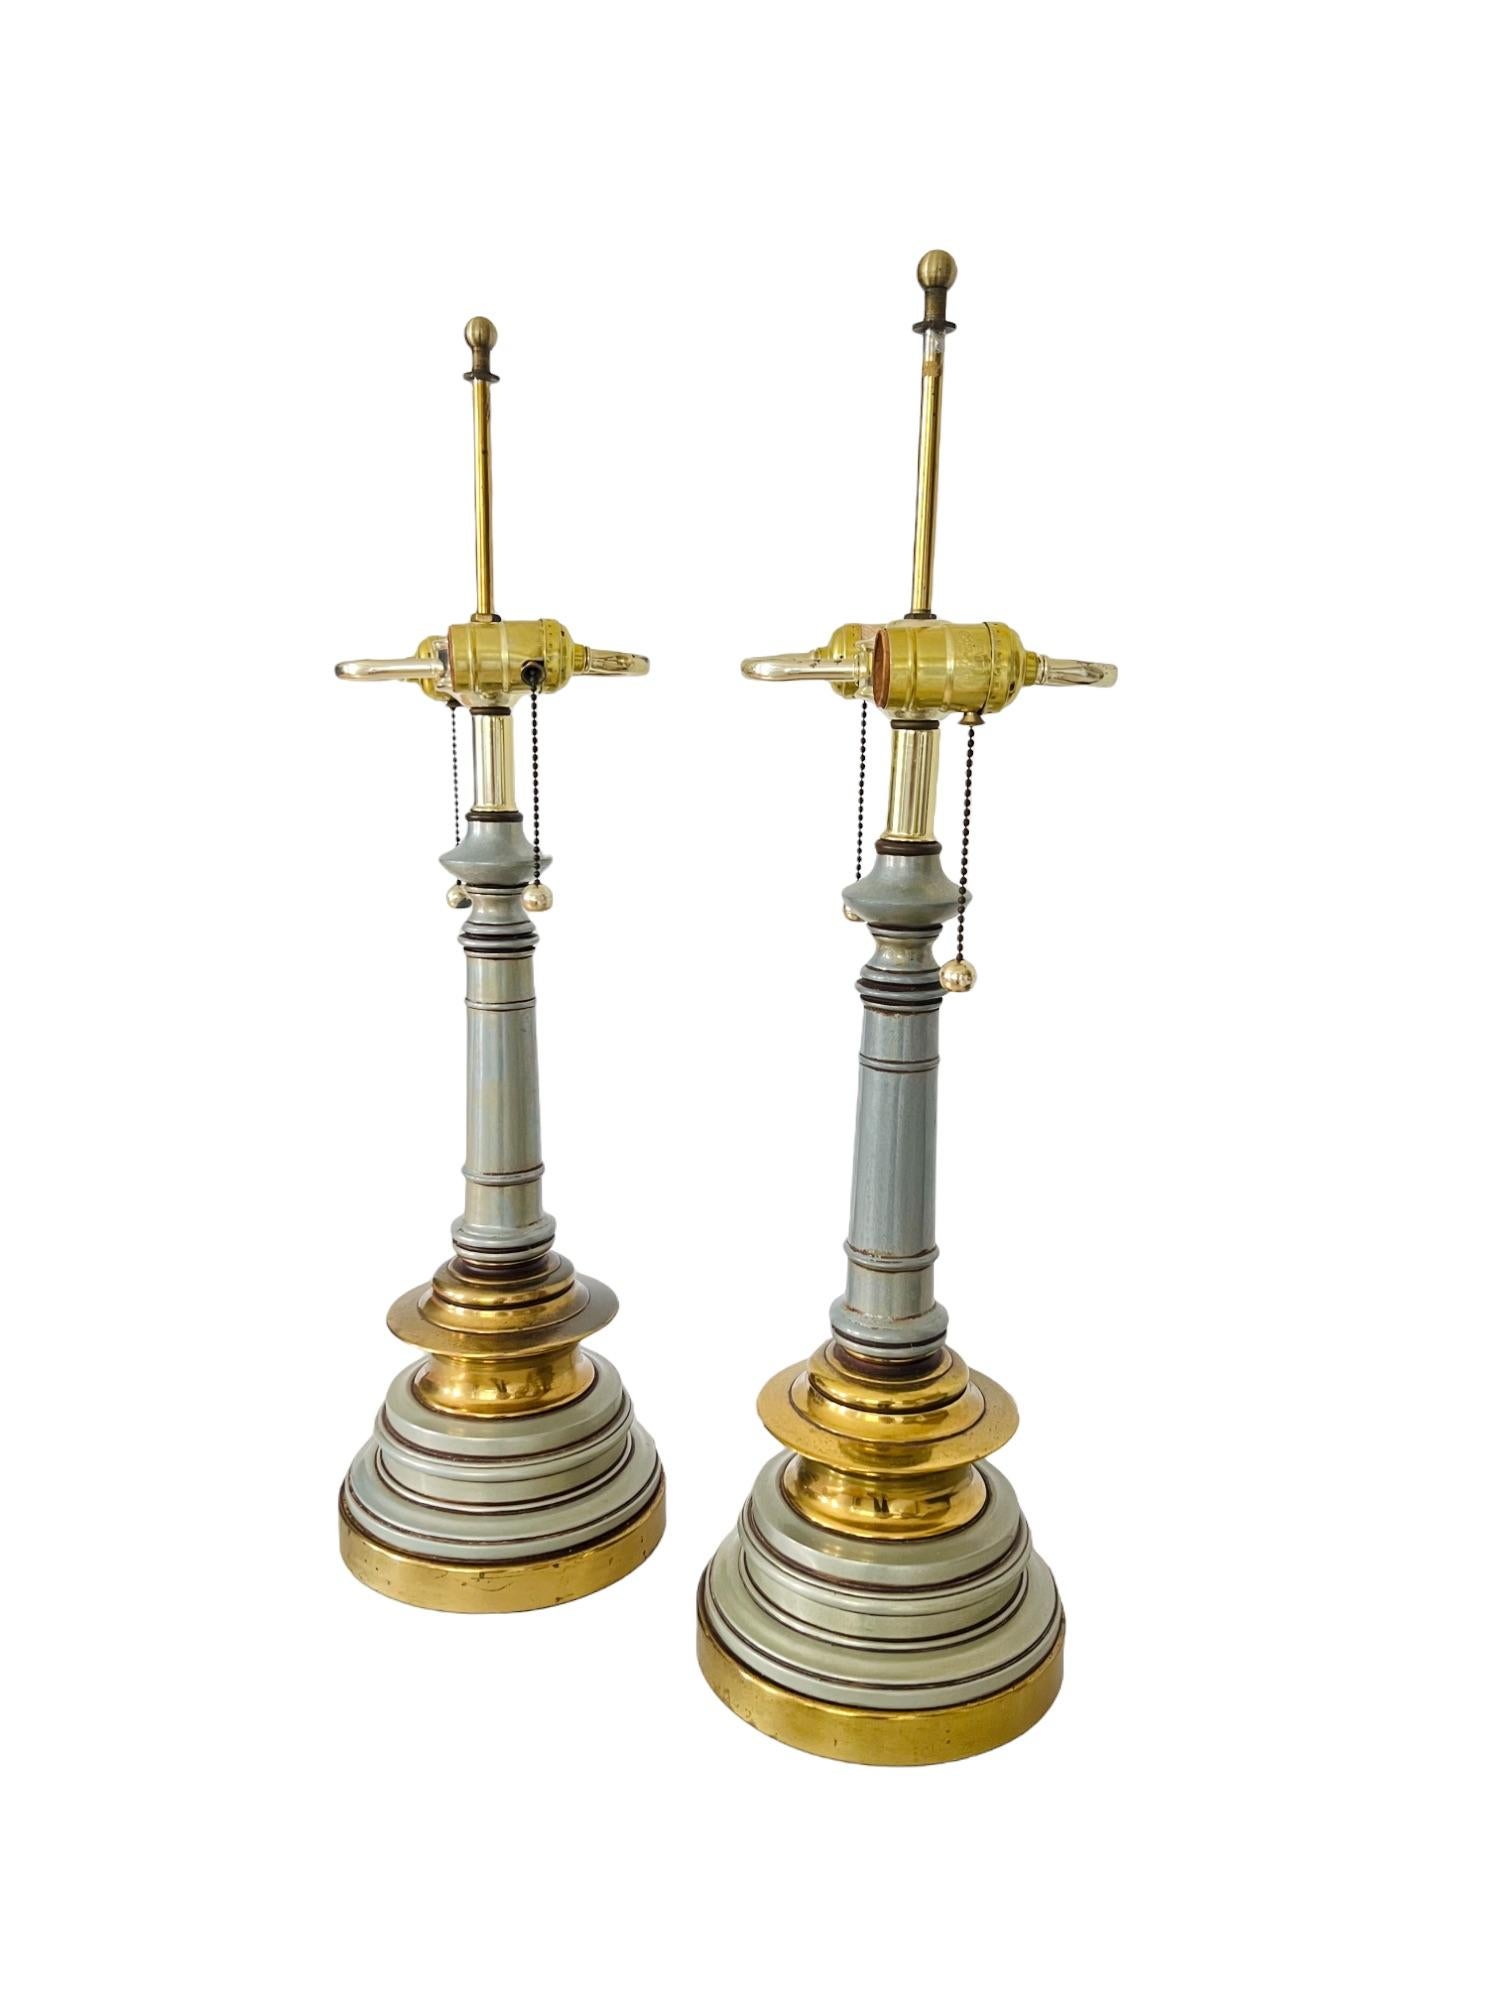 Metal Hollywood Regency Enamel & Brass Lamps with Yellow Shades, a Pair